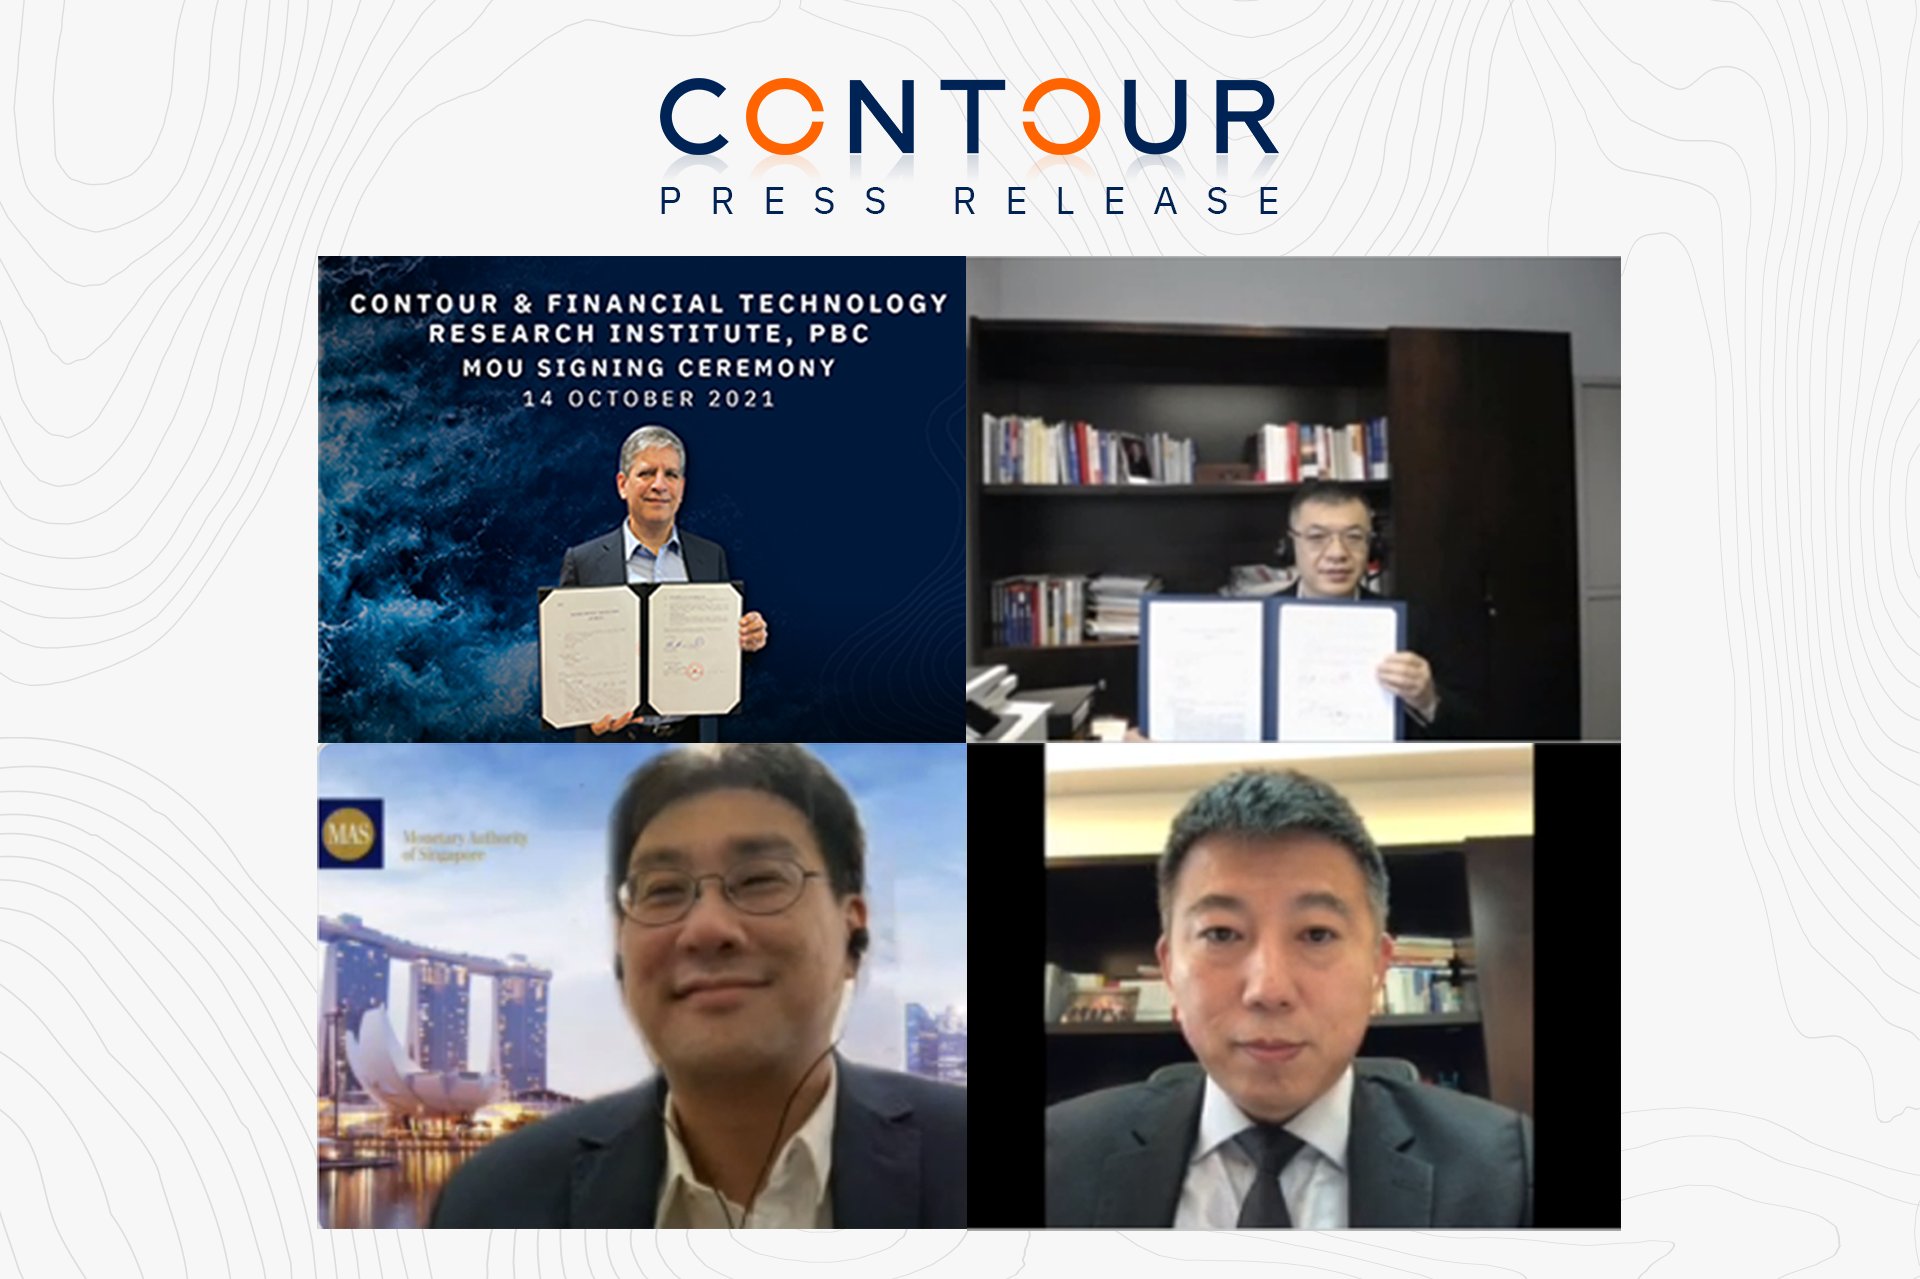 Contour partners with Shenzhen FinTech Institute of the People’s Bank of China to further digitise trade across Asia